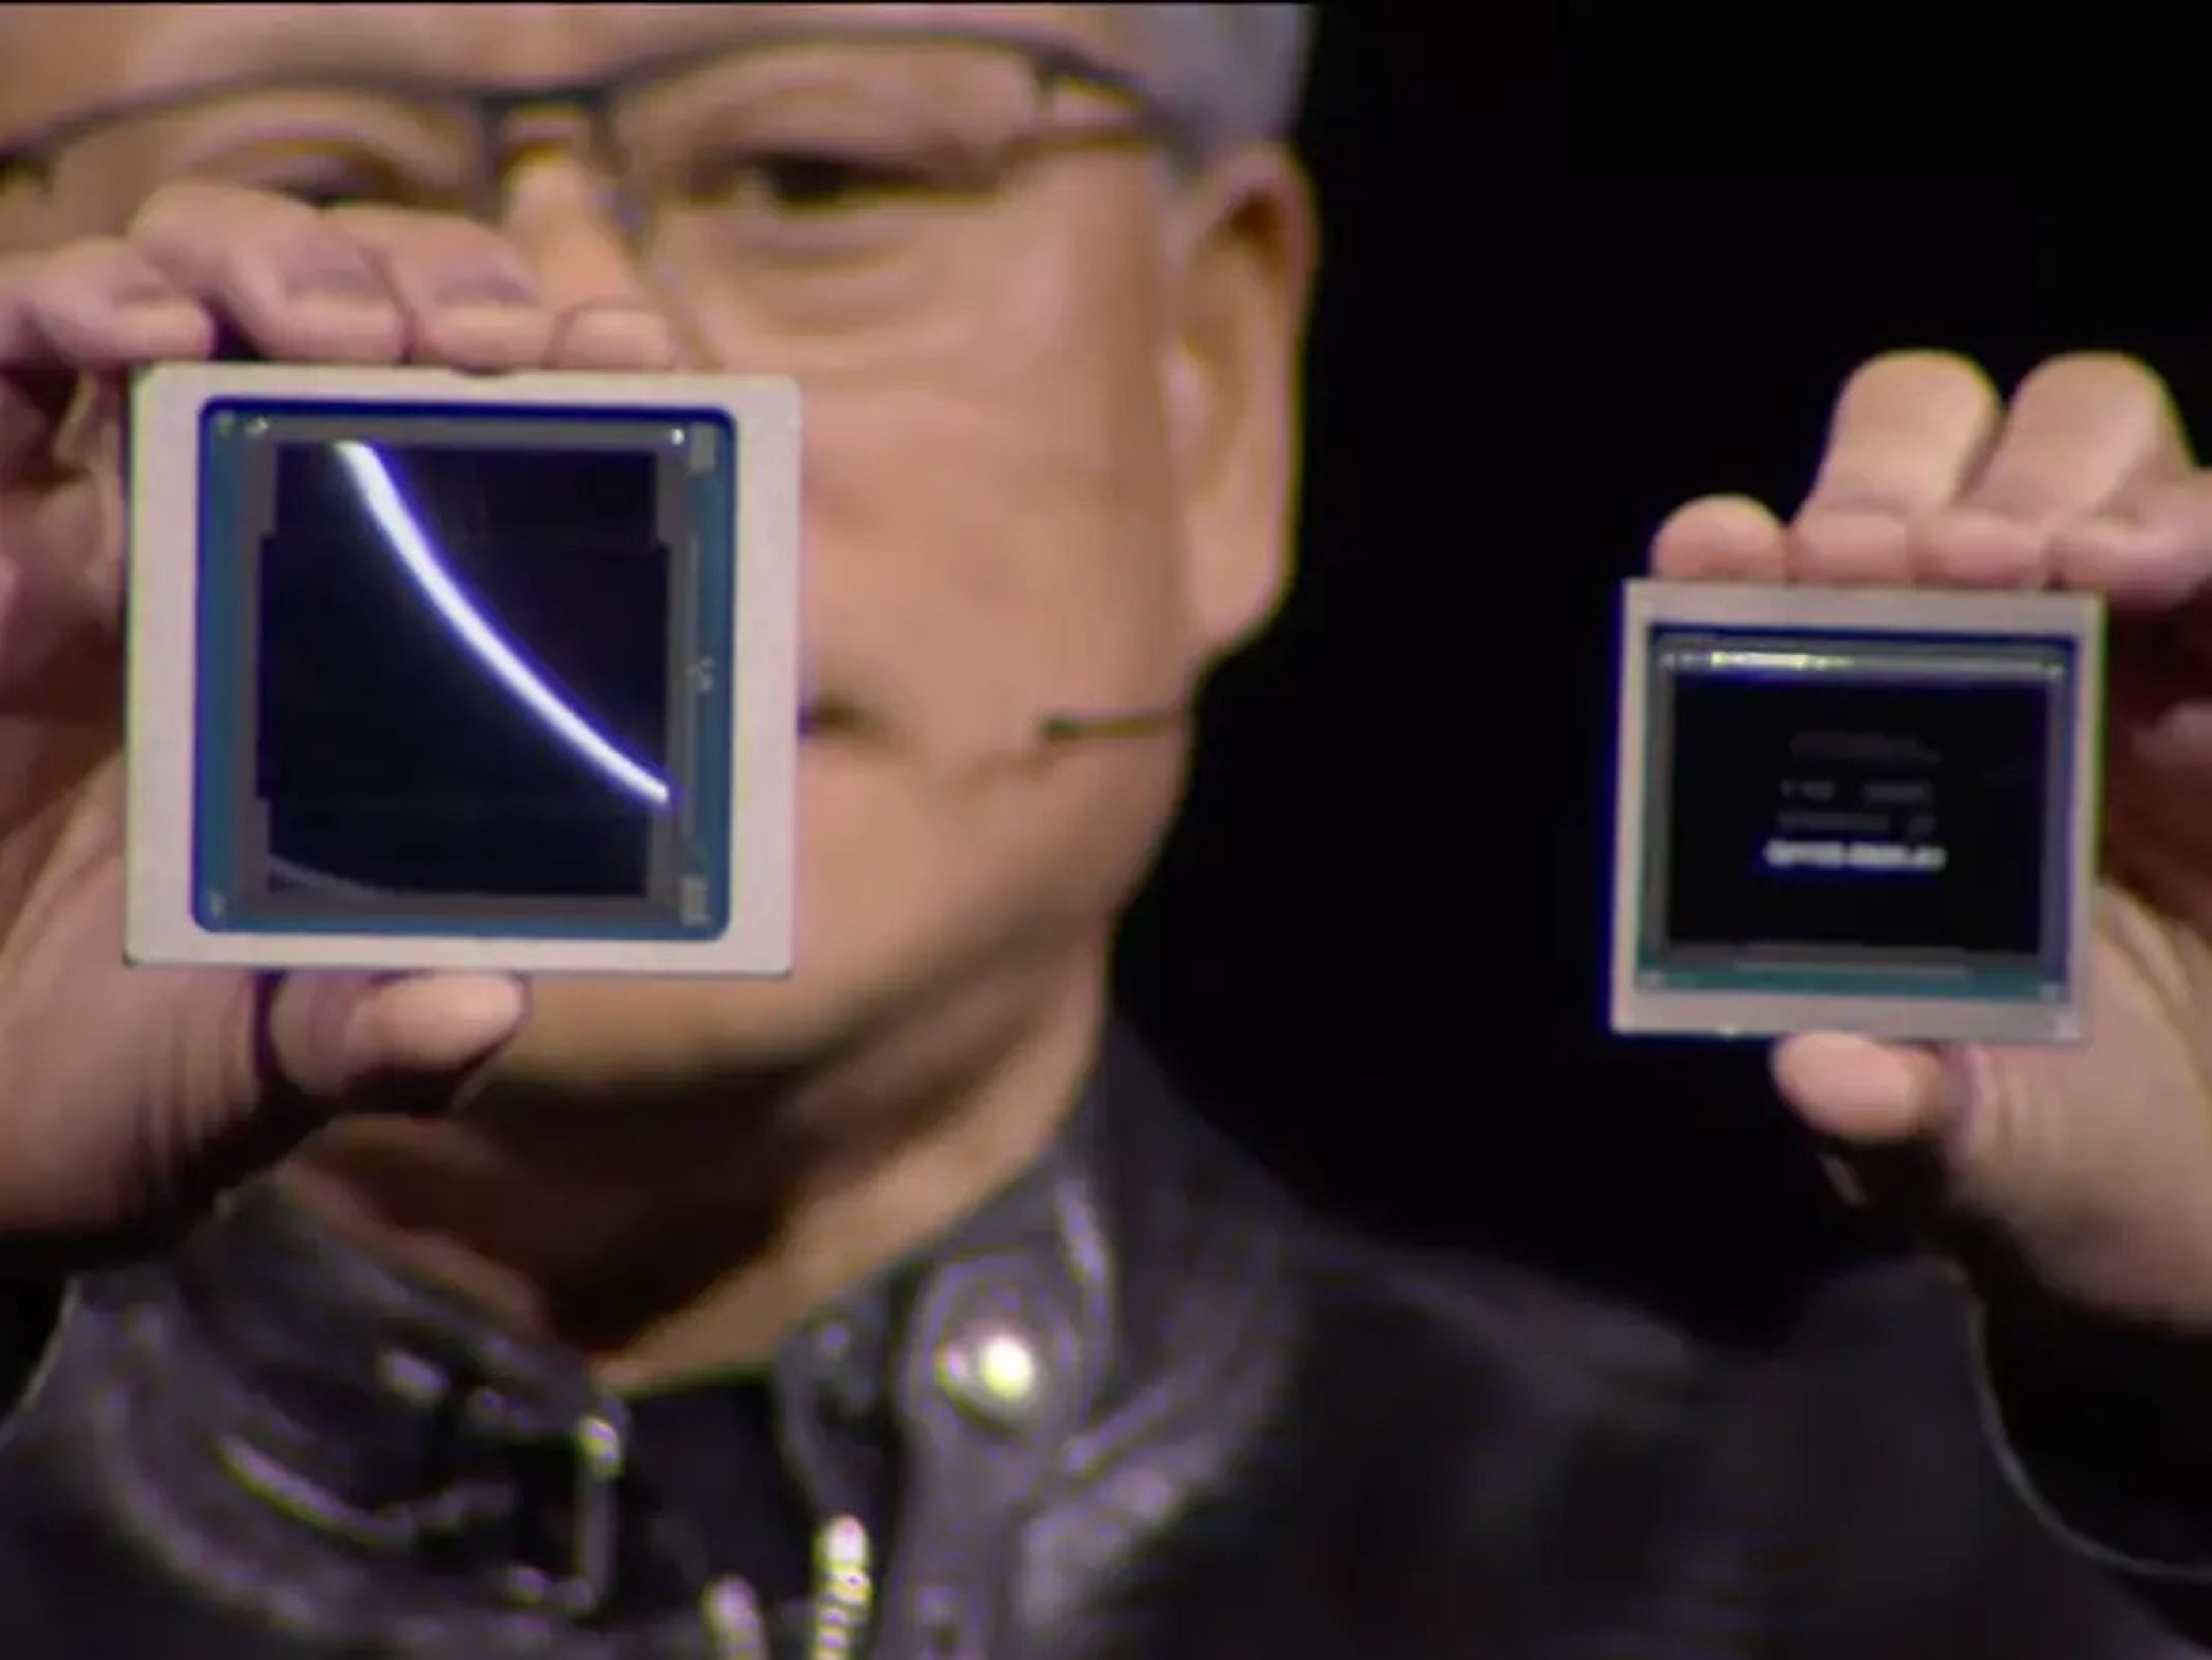 Huang holds up two chips while speaking onstage at the GTC conference.